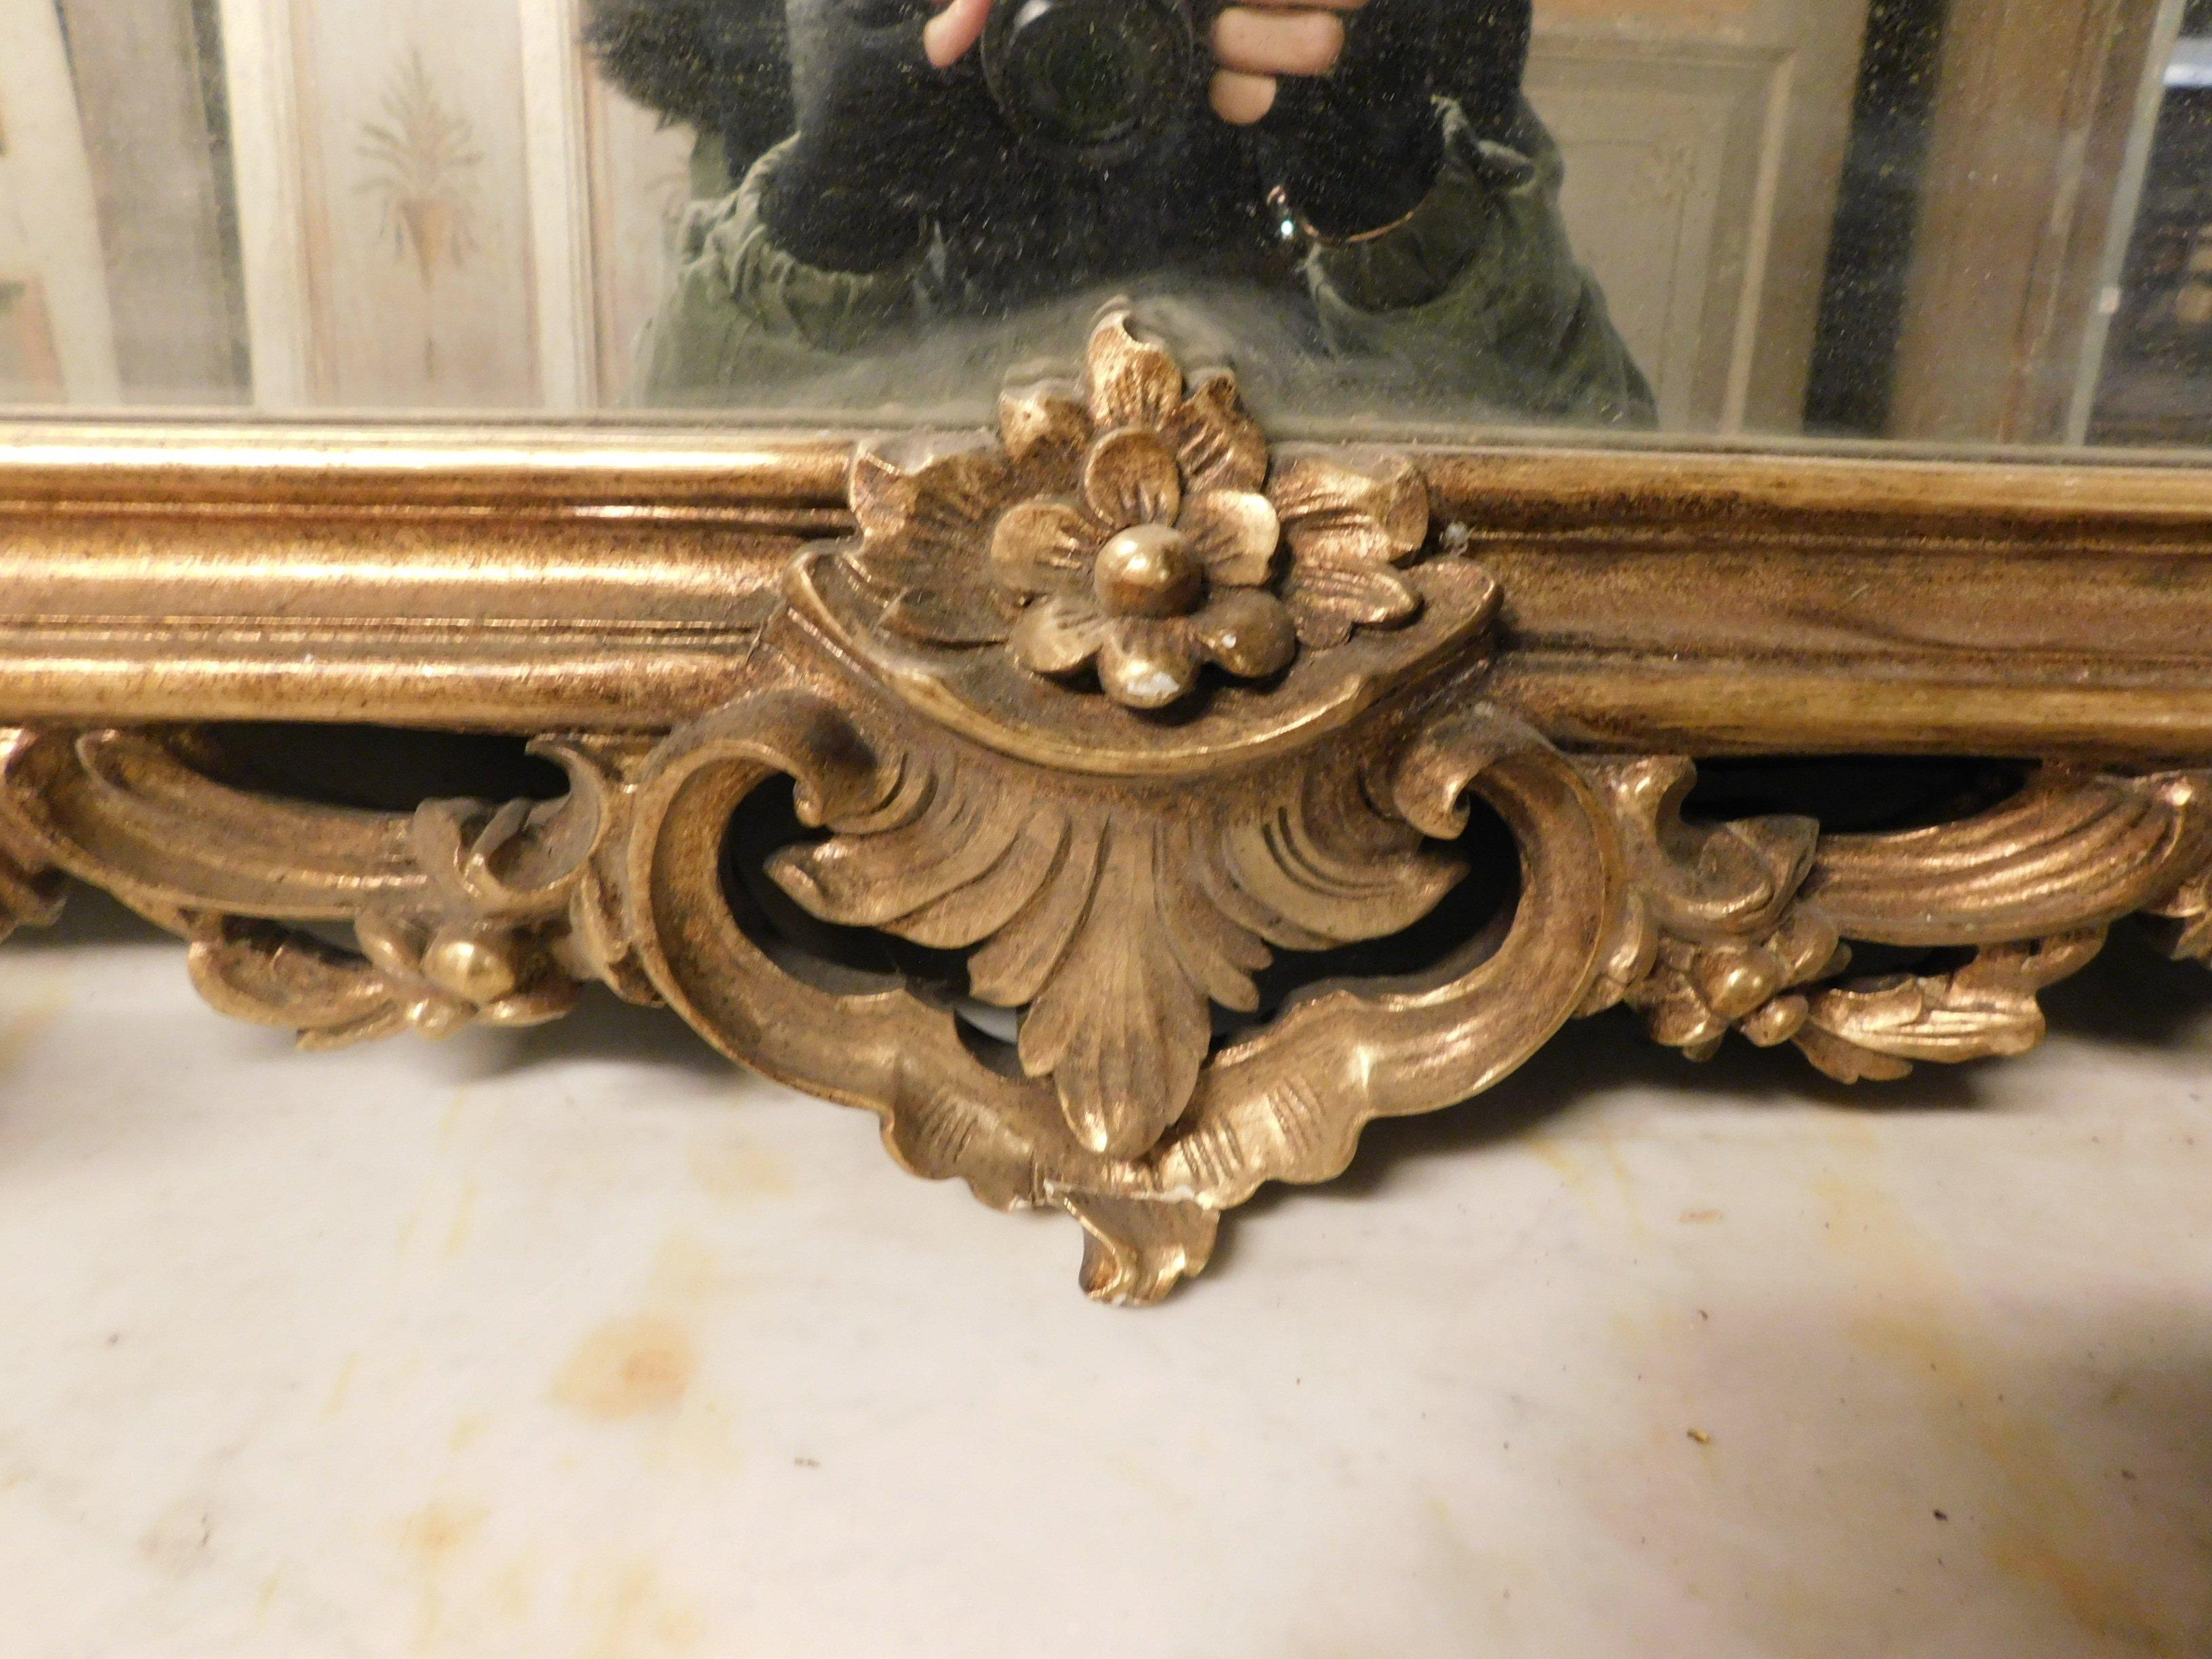 Italian Vintage Gilded and Richly Carved Mirror, Rectangular, 20th Century Italy